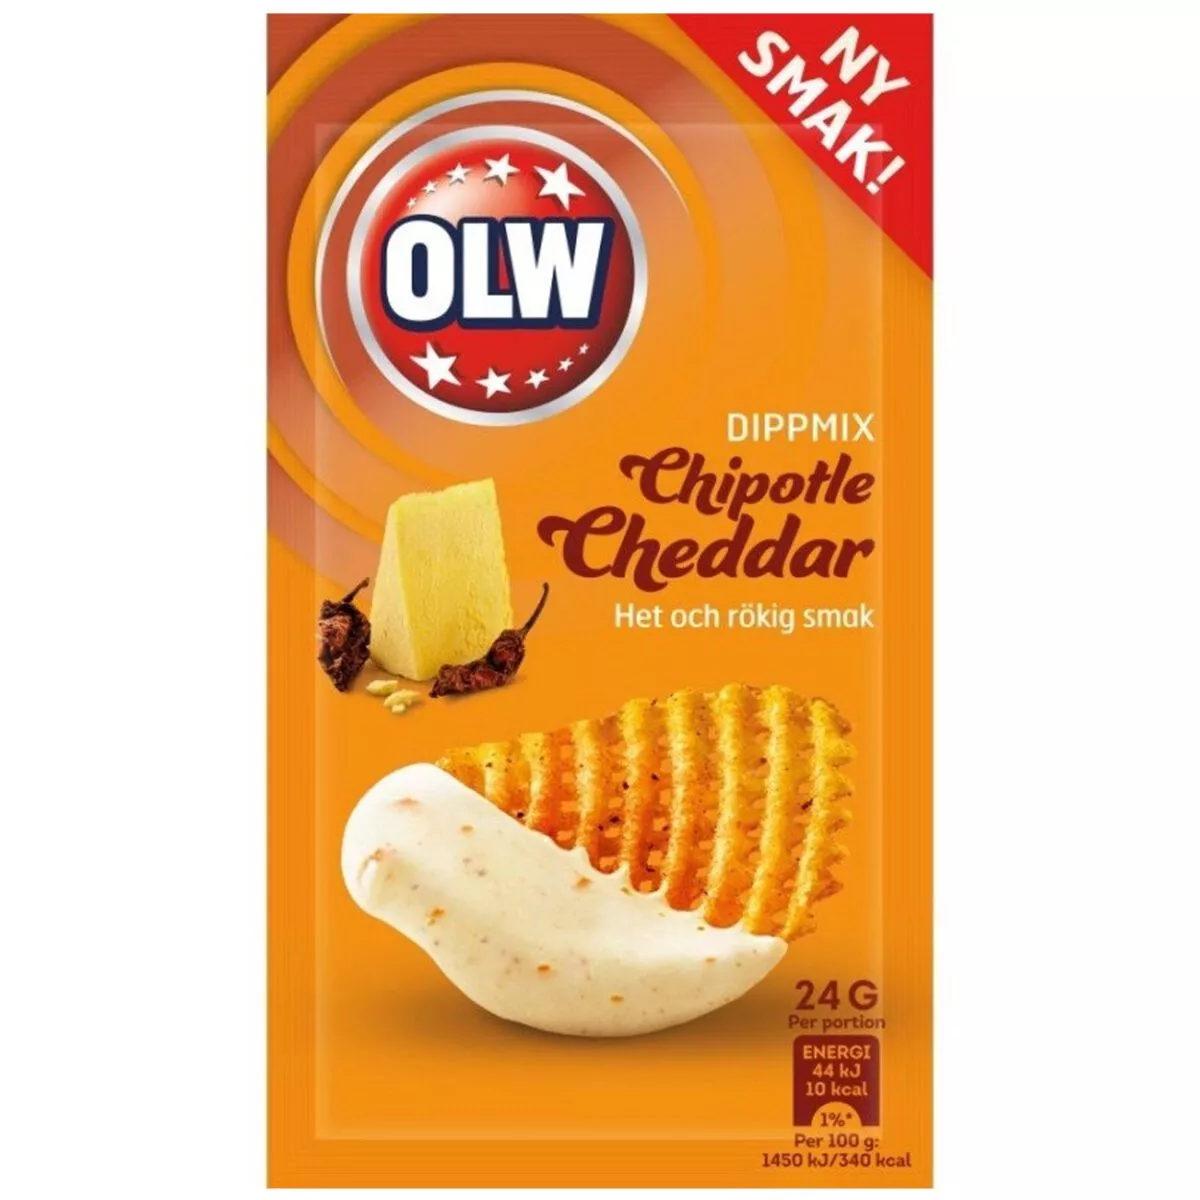 OLW Dippmix Chipotle Cheddar (24g) 1